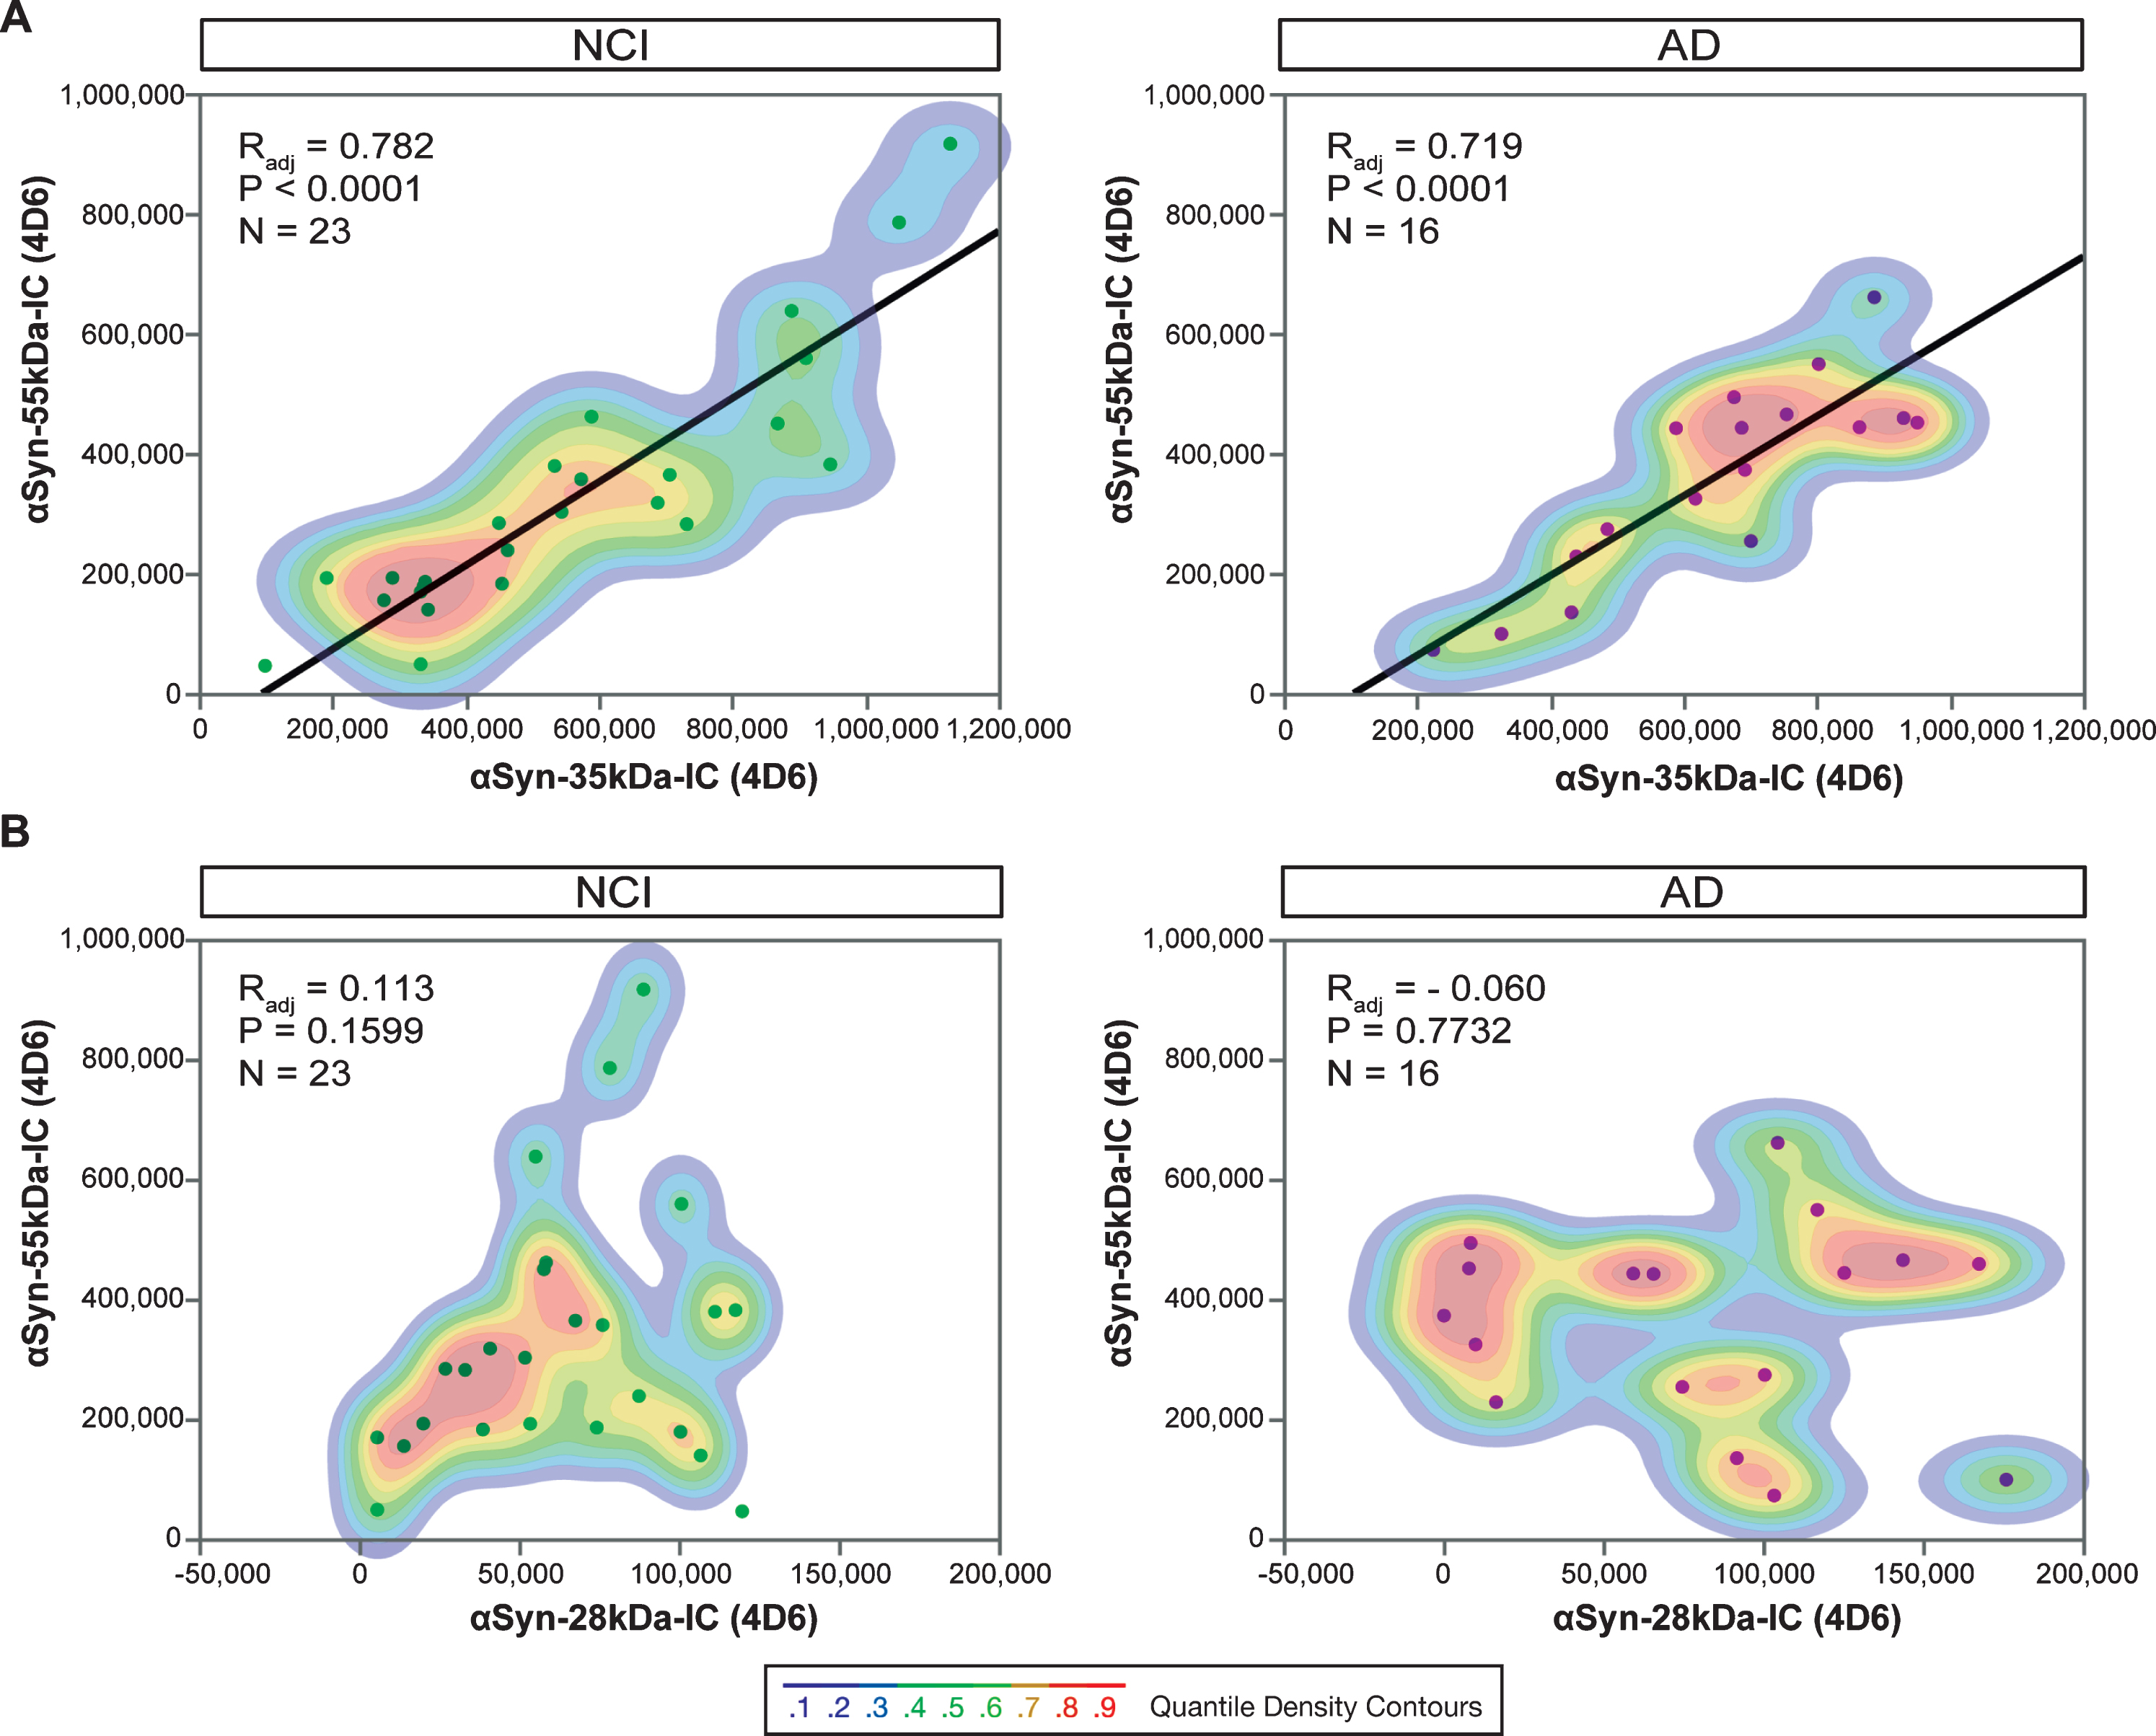 Relationships between 28-, 35- and 55 kDa αSyn oligomers in human brain tissue from cognitively intact subjects and subjects with AD within the ROS cohort. Regression analyses and quantile density contours for pair-wise comparisons between 35 kDa (A) or 28 kDa (B) dimeric αSyn and the ∼55–56 kDa putative αSyn tetramer detected in the intracellular-enriched fraction (IC). All species were detected with the monoclonal antibody 4D6. NCI, no cognitive impairment; AD, Alzheimer’s disease; ROS, Religious Orders Study.